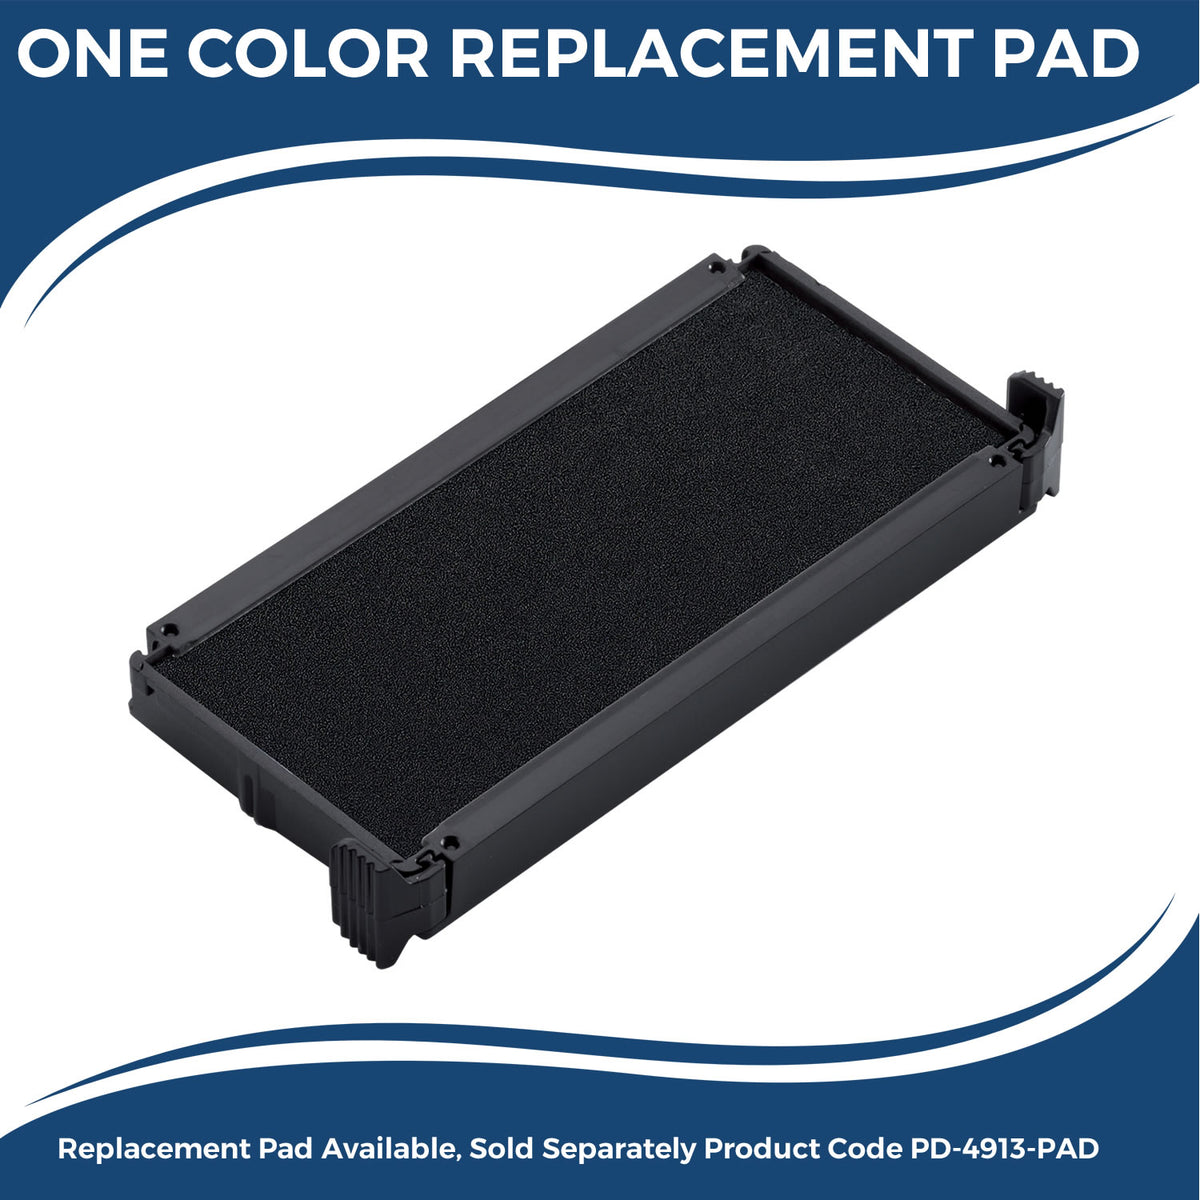 Large Self Inking Rejected Stamp 4150S Large Replacment Pad